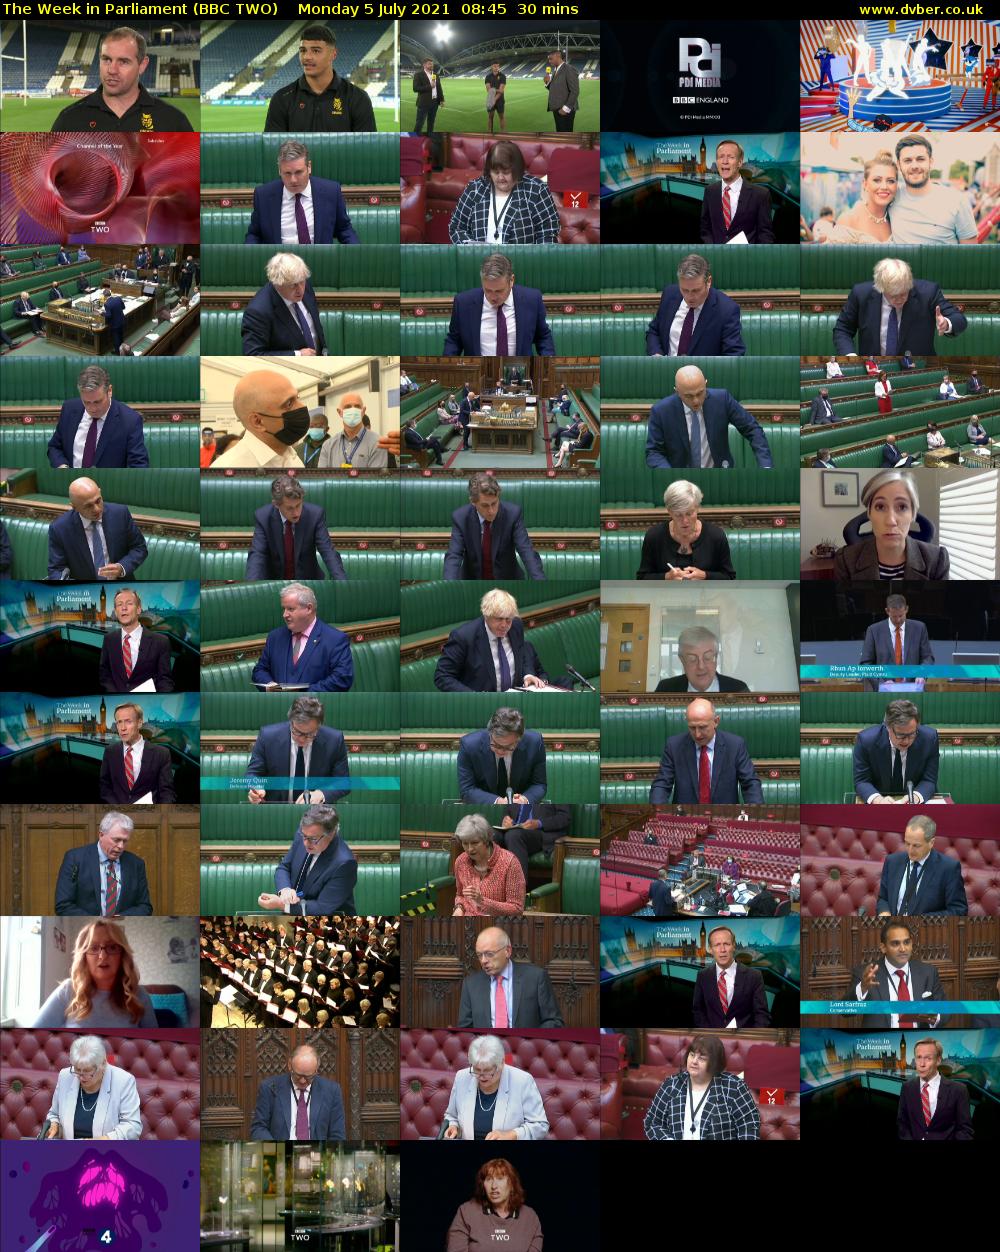 The Week in Parliament (BBC TWO) Monday 5 July 2021 08:45 - 09:15